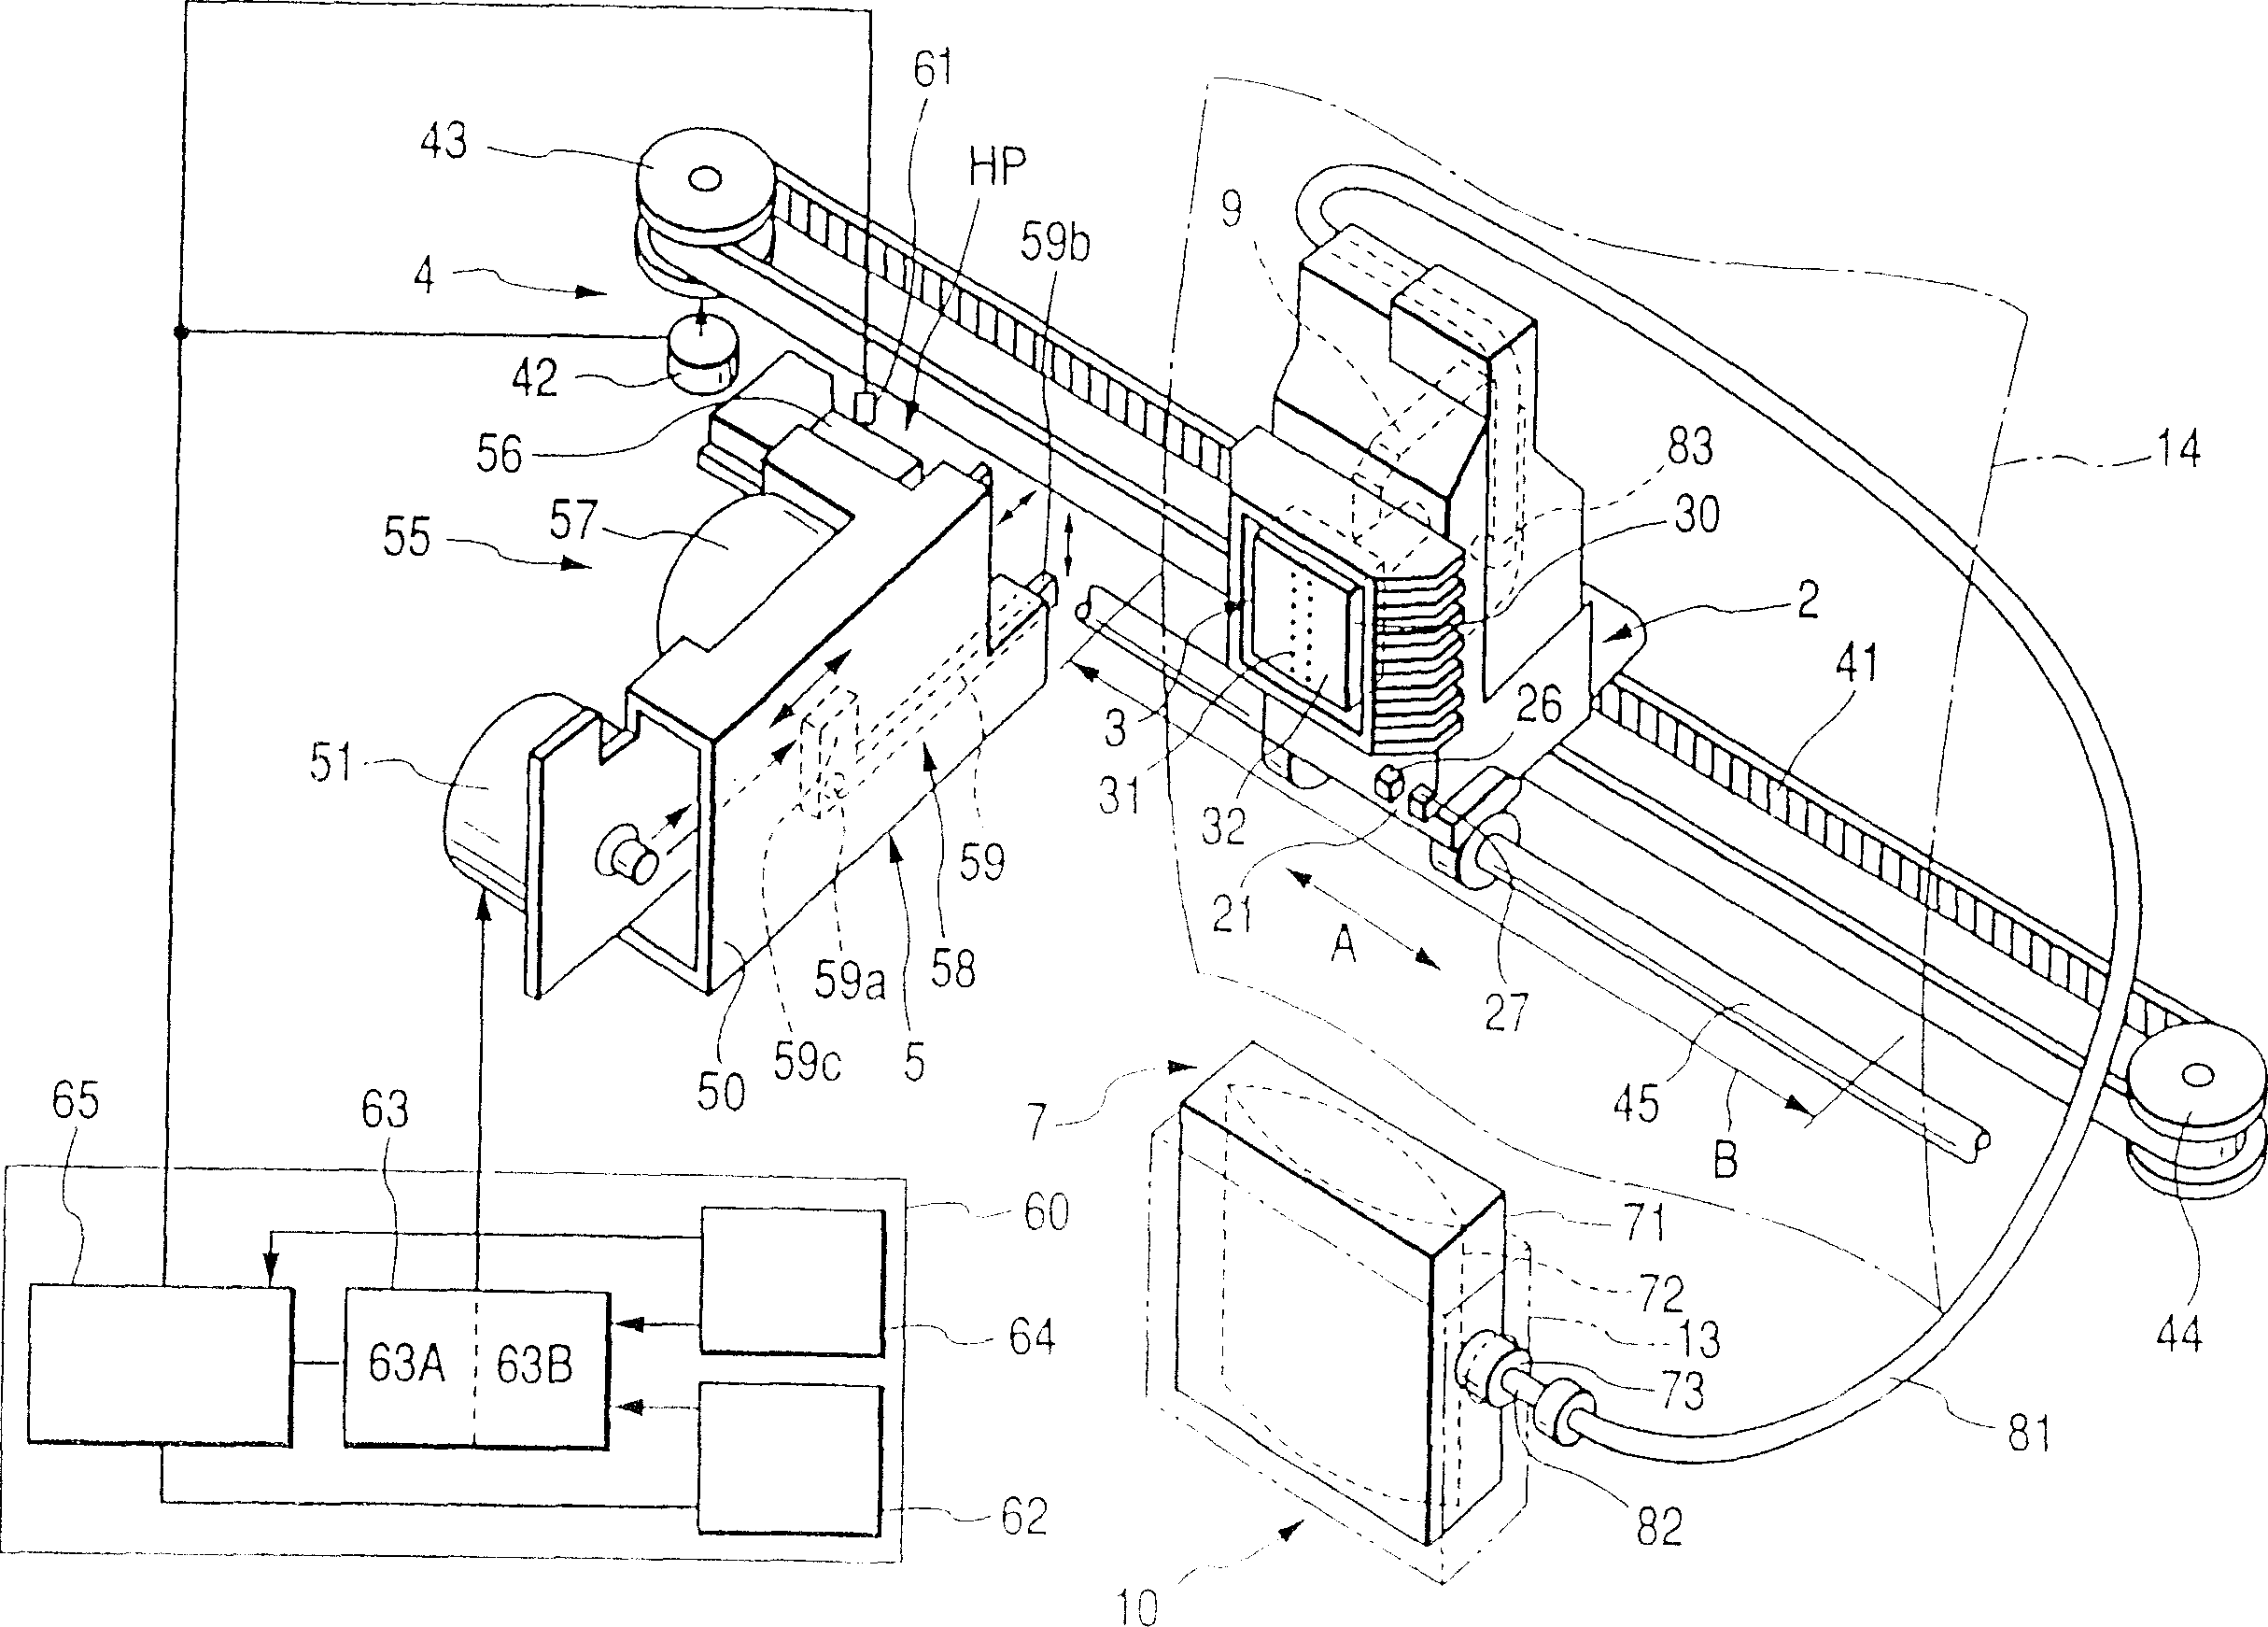 Ink jet recording apparatus and method